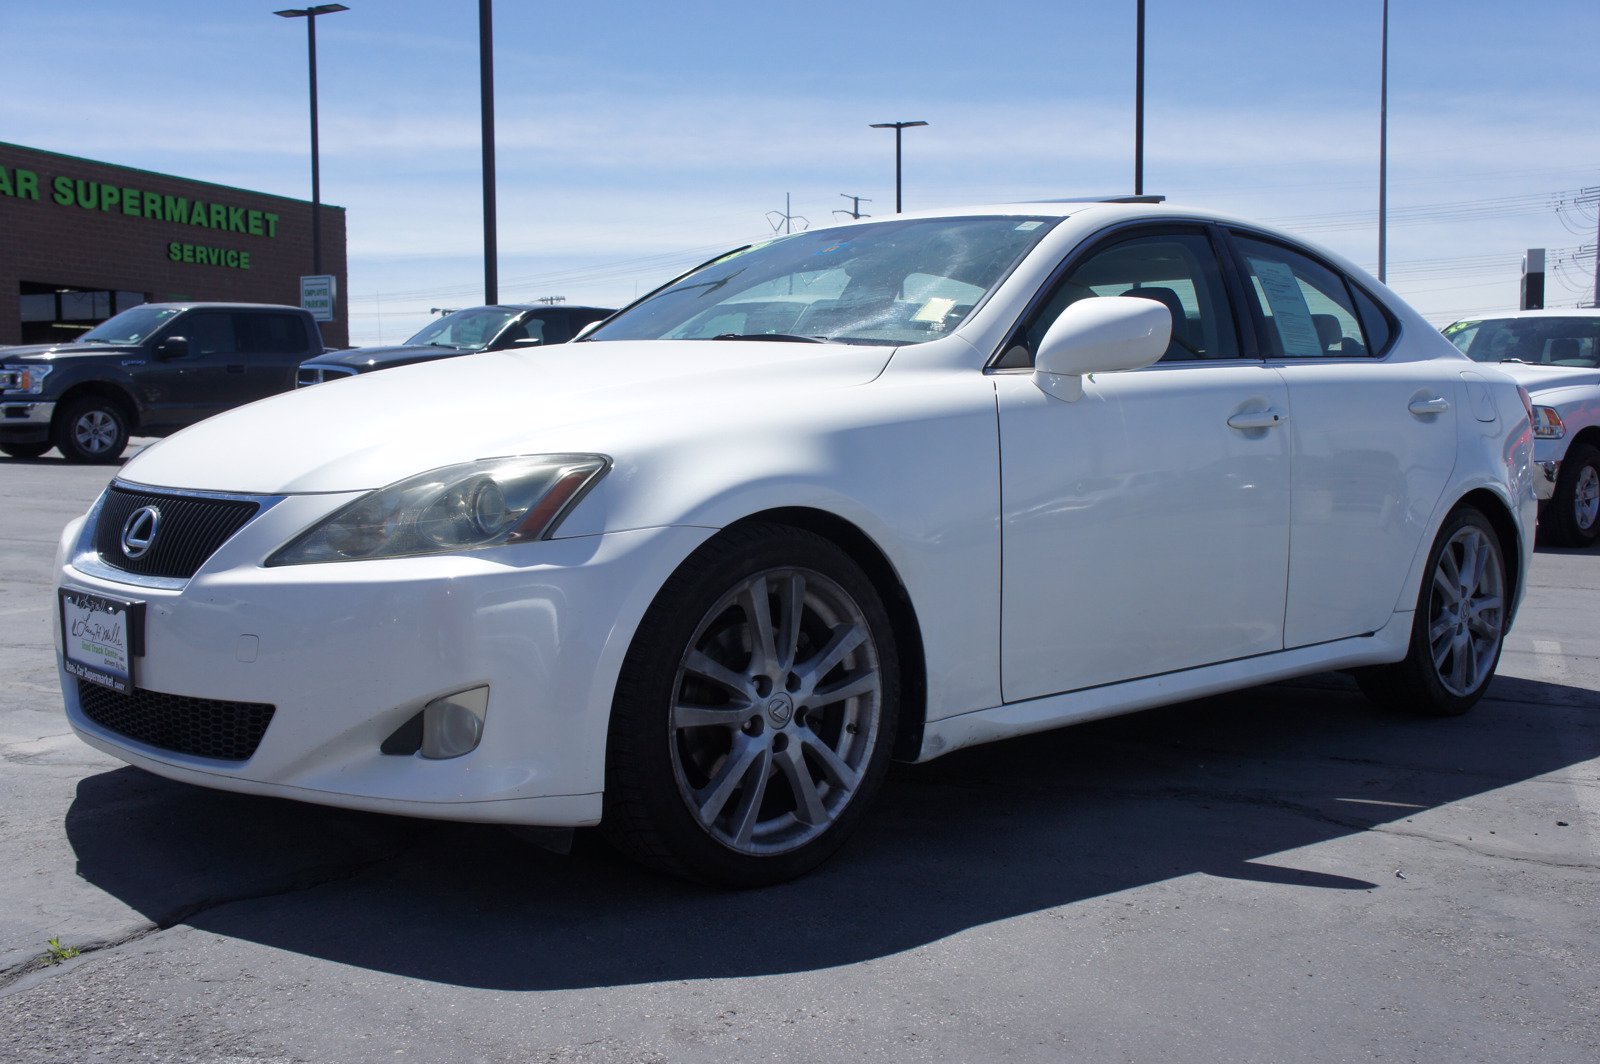 PreOwned 2006 Lexus IS 250 Auto 4dr Car in Sandy S8004A